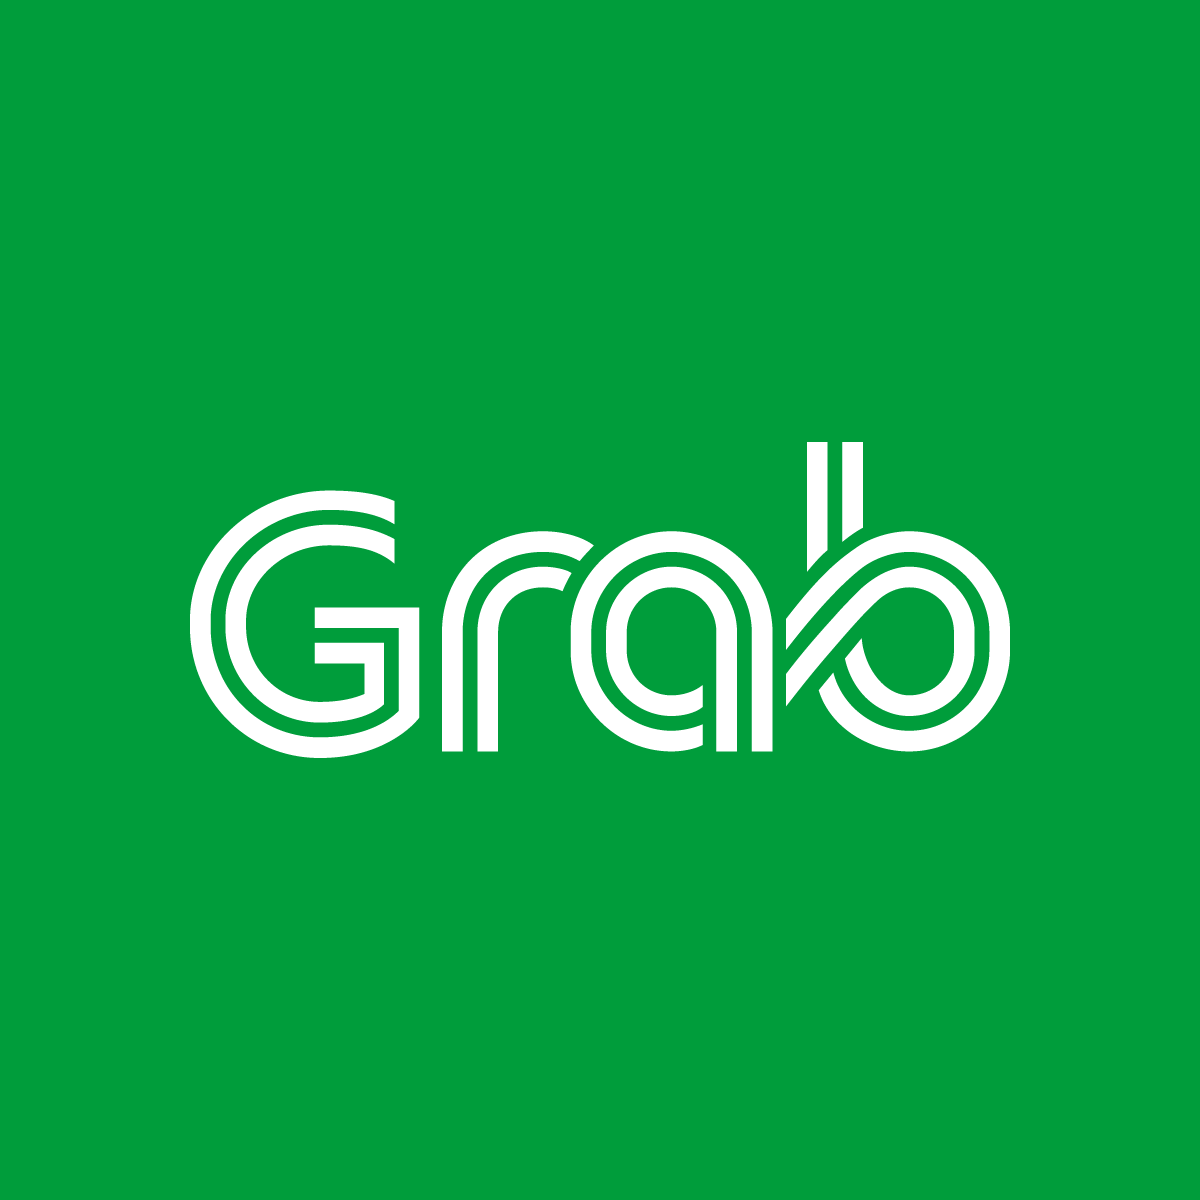 grab-promo-code-rm5-off-5-free-rides-credit-debit-card-first-5-000